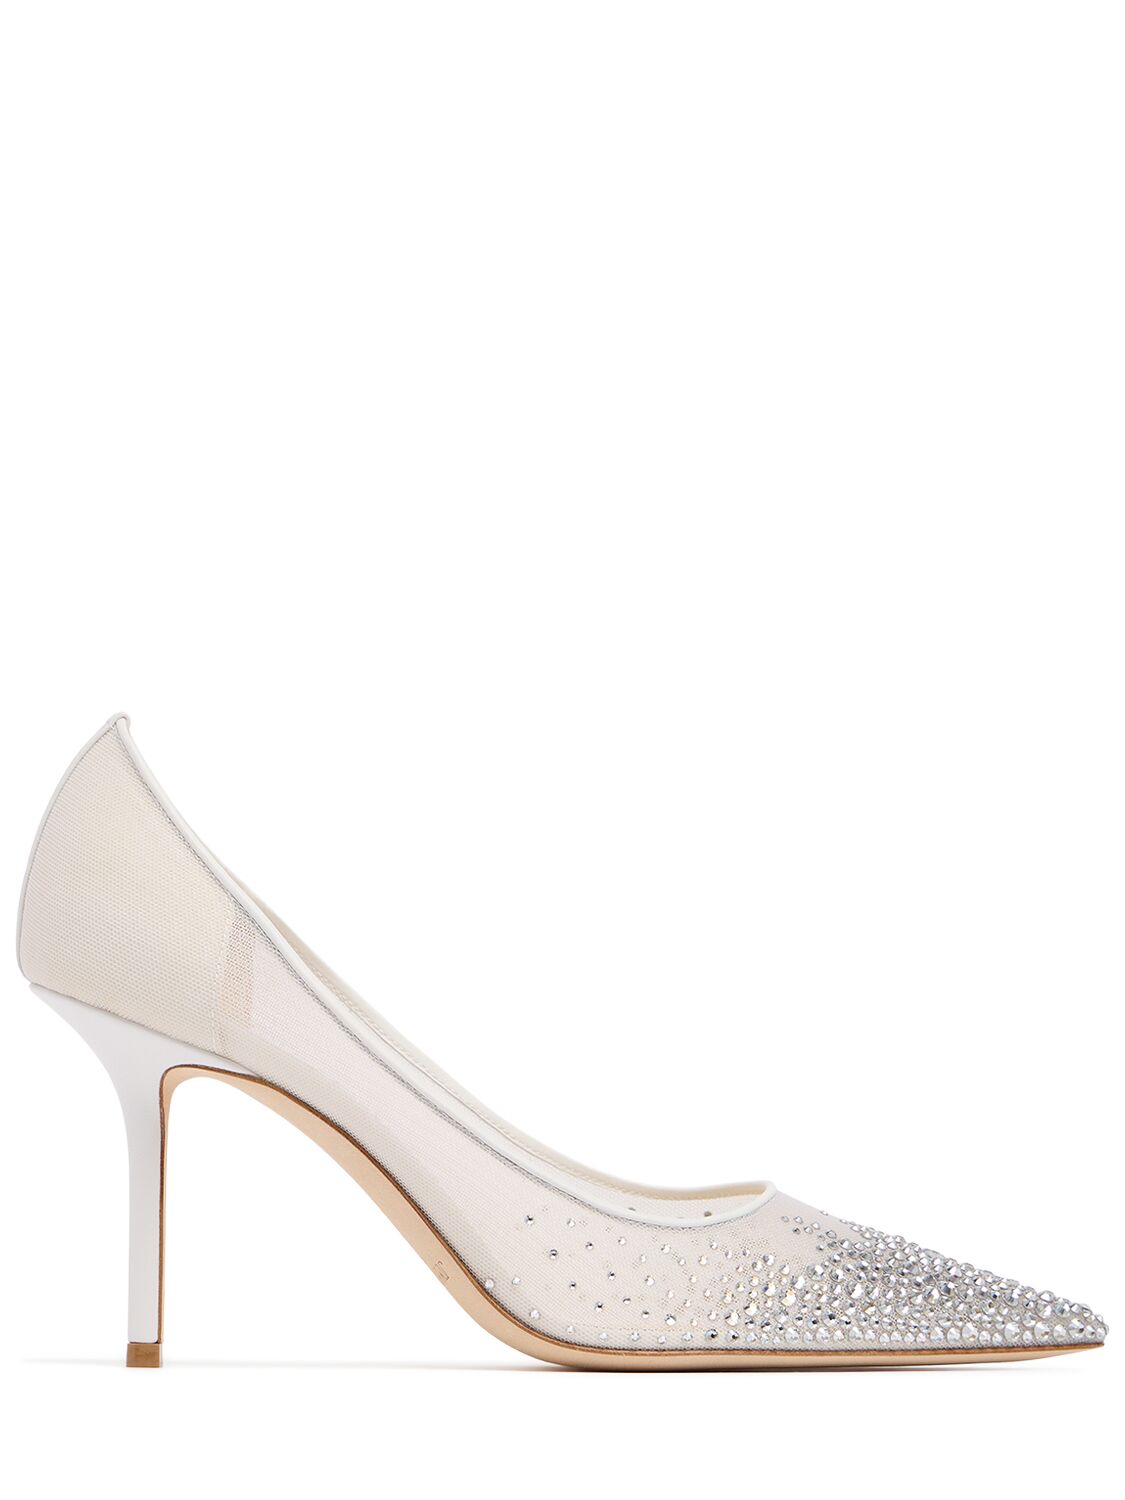 Jimmy Choo 85mm Love Embellished Tulle Pumps In White/crystal